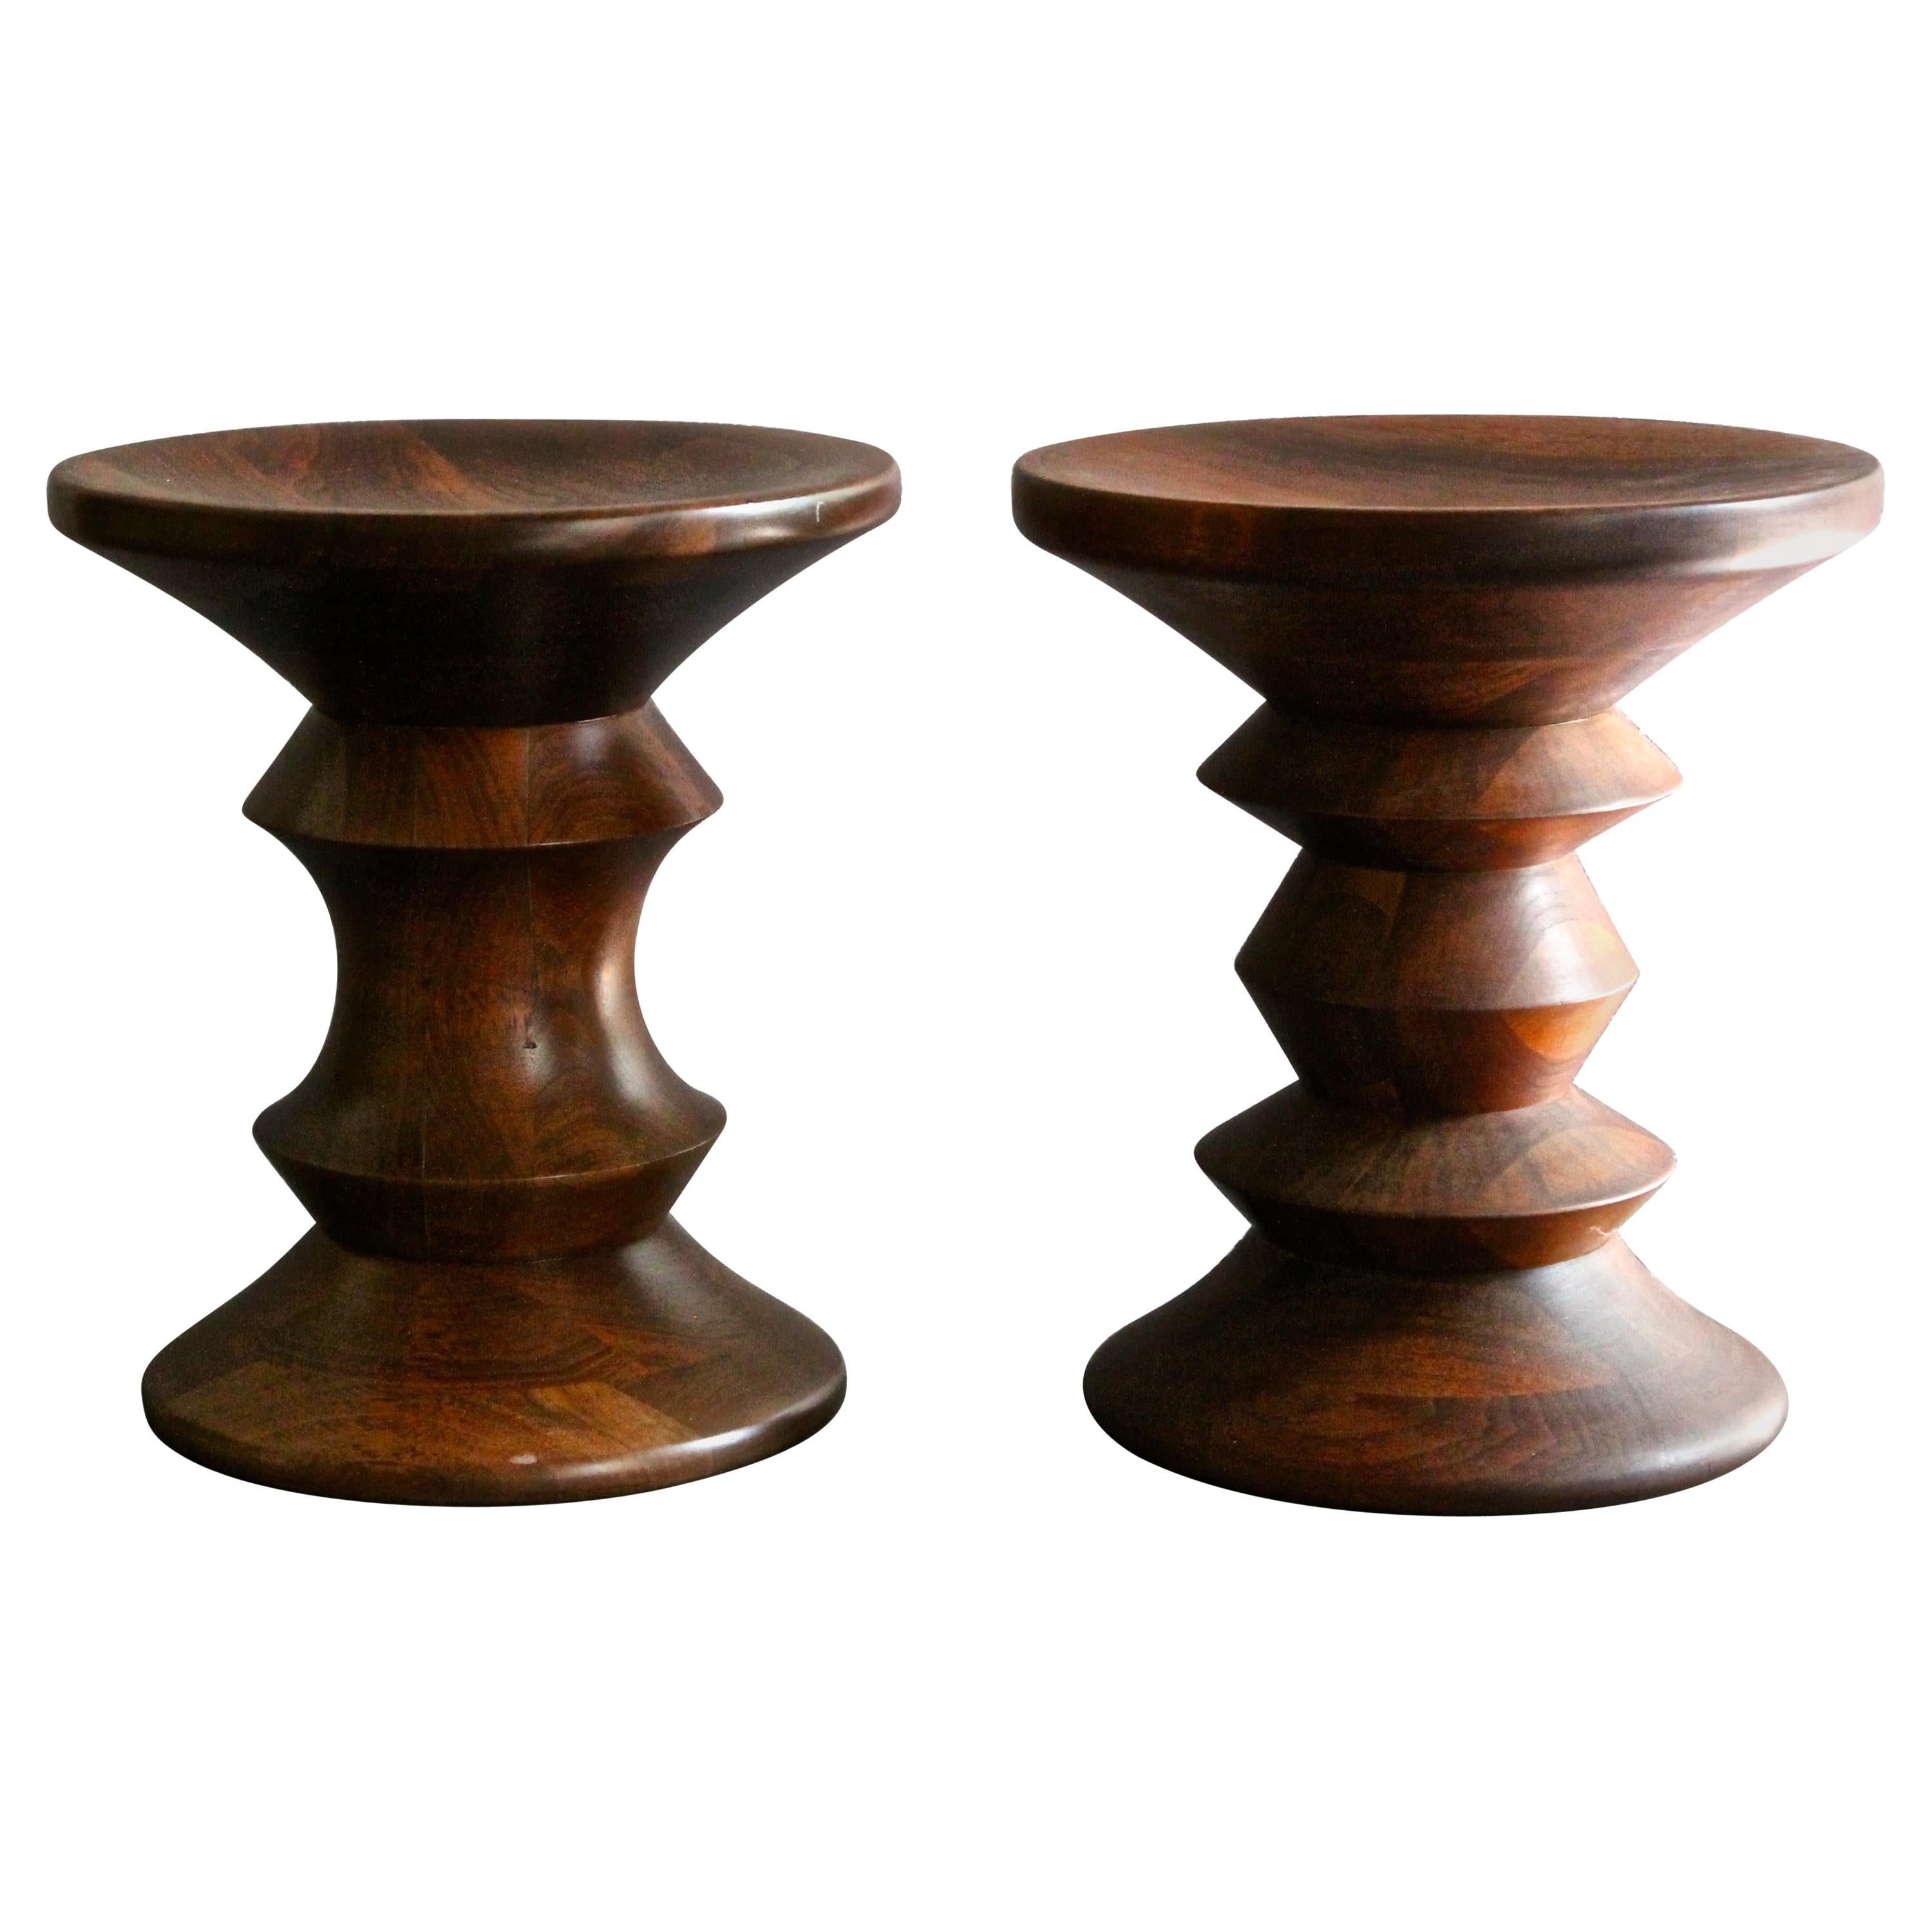 Two Eames 'Time-Life' Walnut Stools